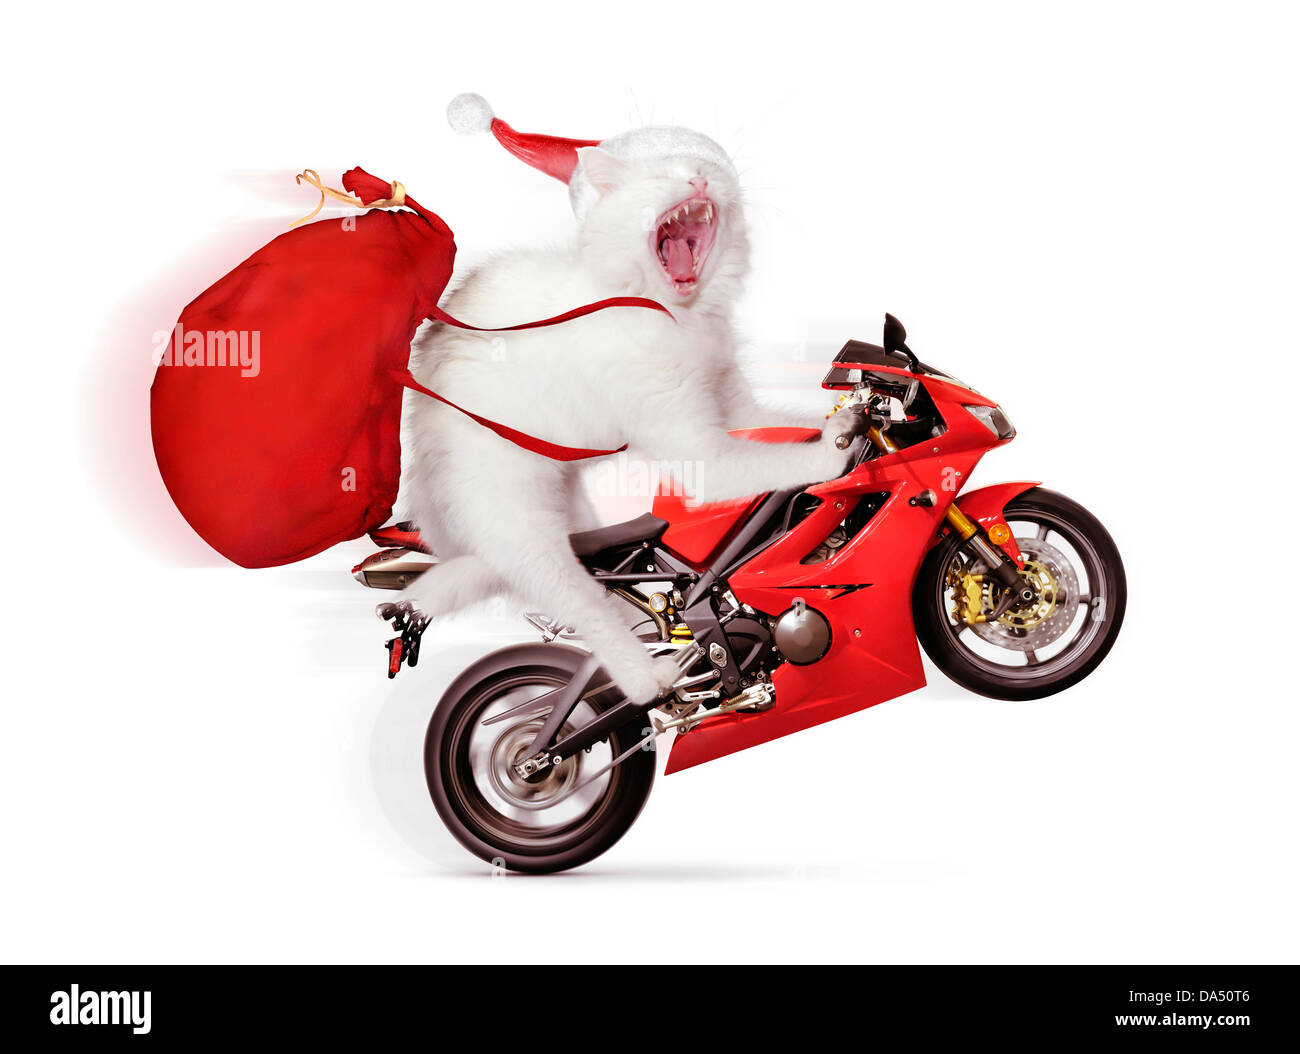 License available at MaximImages.com - Humorous Christmas concept of a white cat doing a wheelie on a red sports motorcycle, wearing a Santa hat Stock Photo